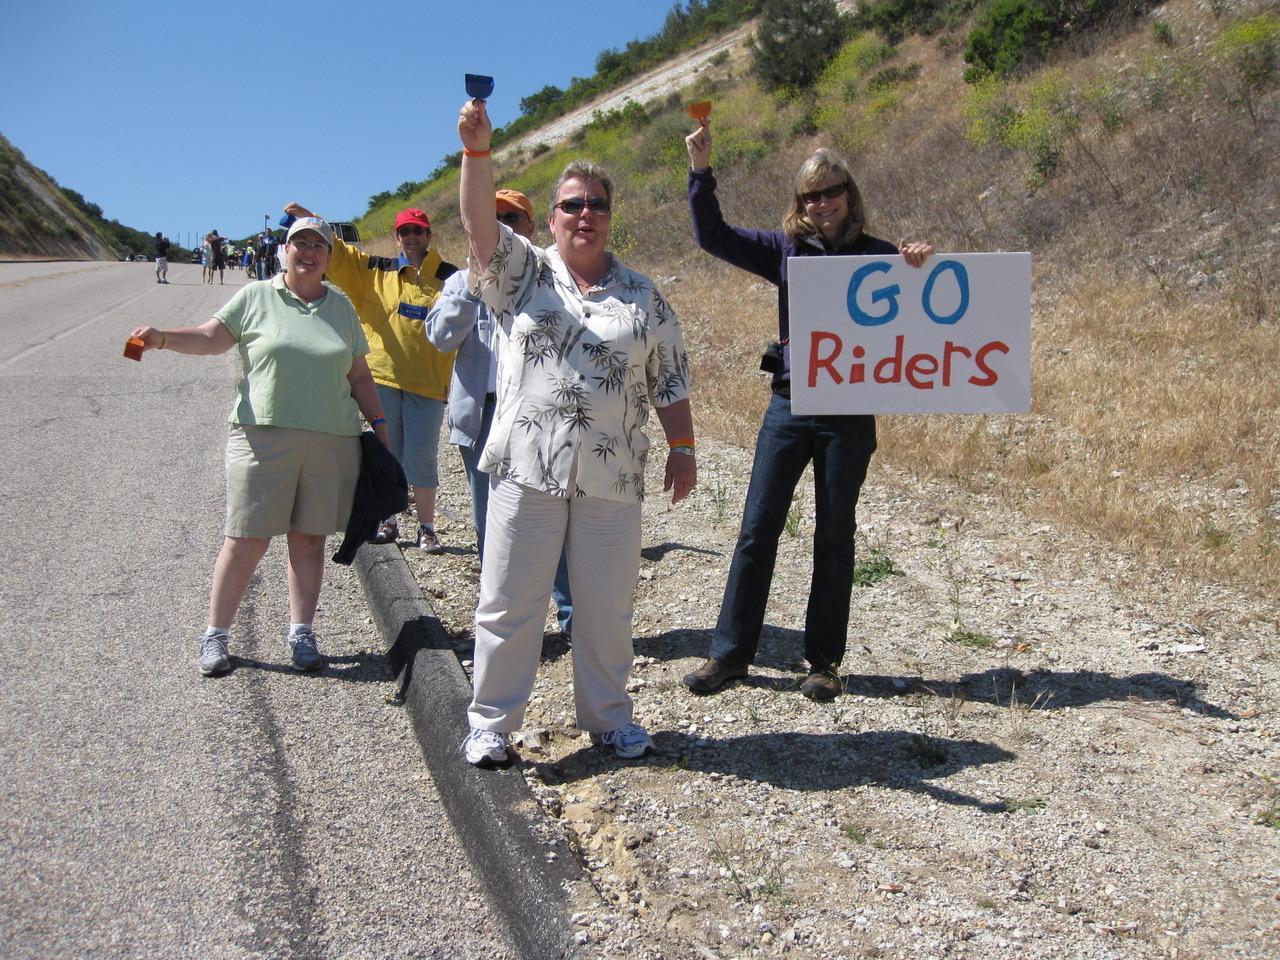 Lorri and her wife Gina Calvelli (on left) cheering on AIDS/LifeCycle riders at the top of the “Evil Twins”. Another participant holds a sign that reads, “Go Riders”.